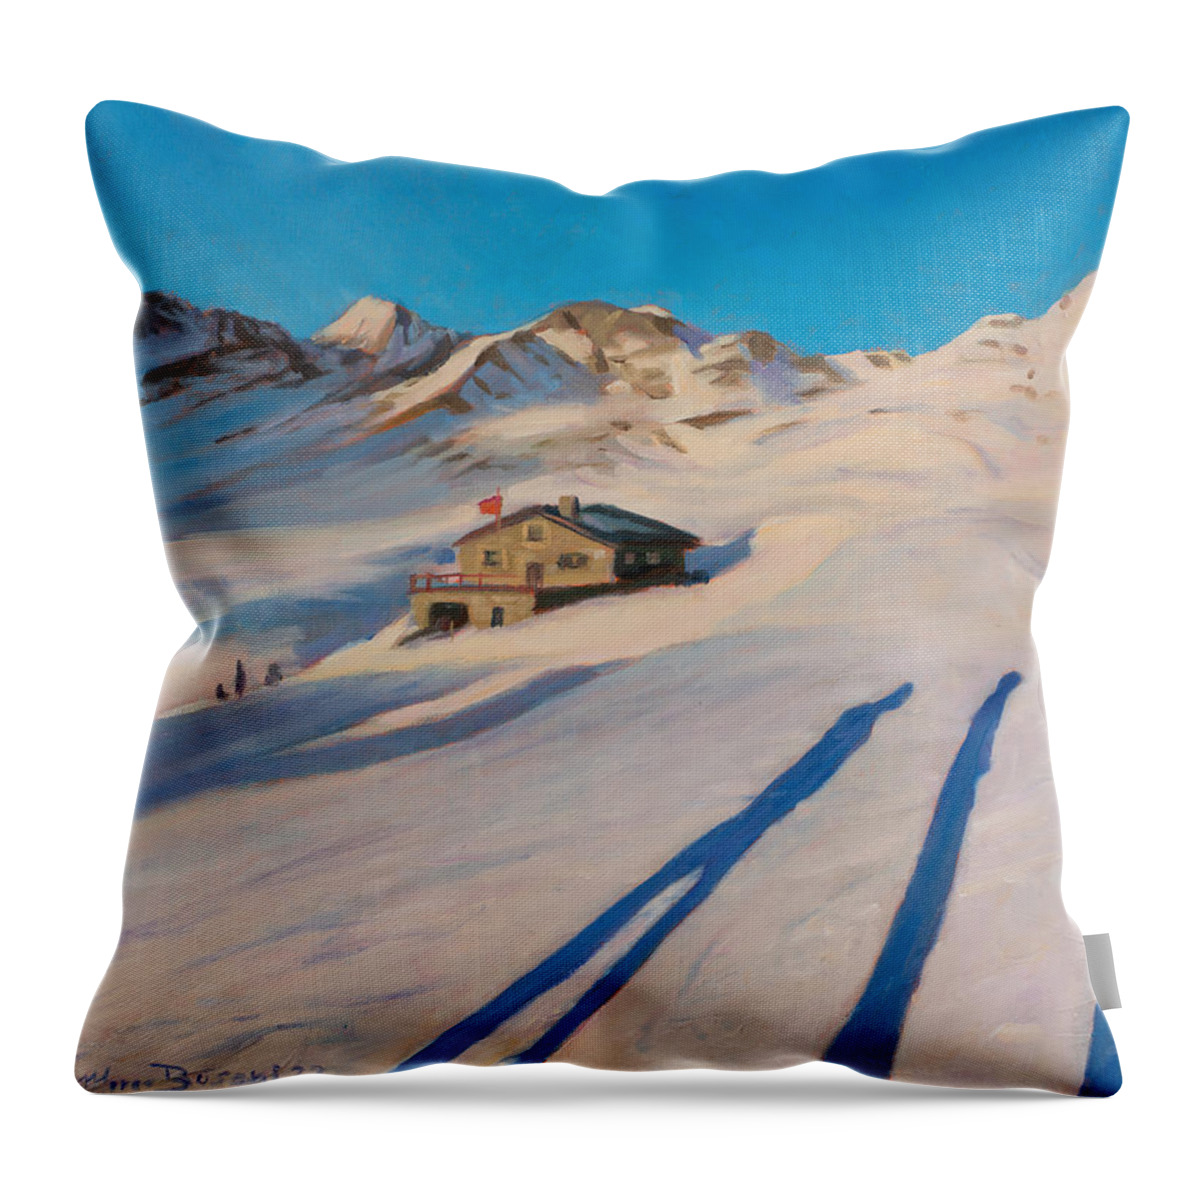 Snow Throw Pillow featuring the painting Blue shadows by Marco Busoni